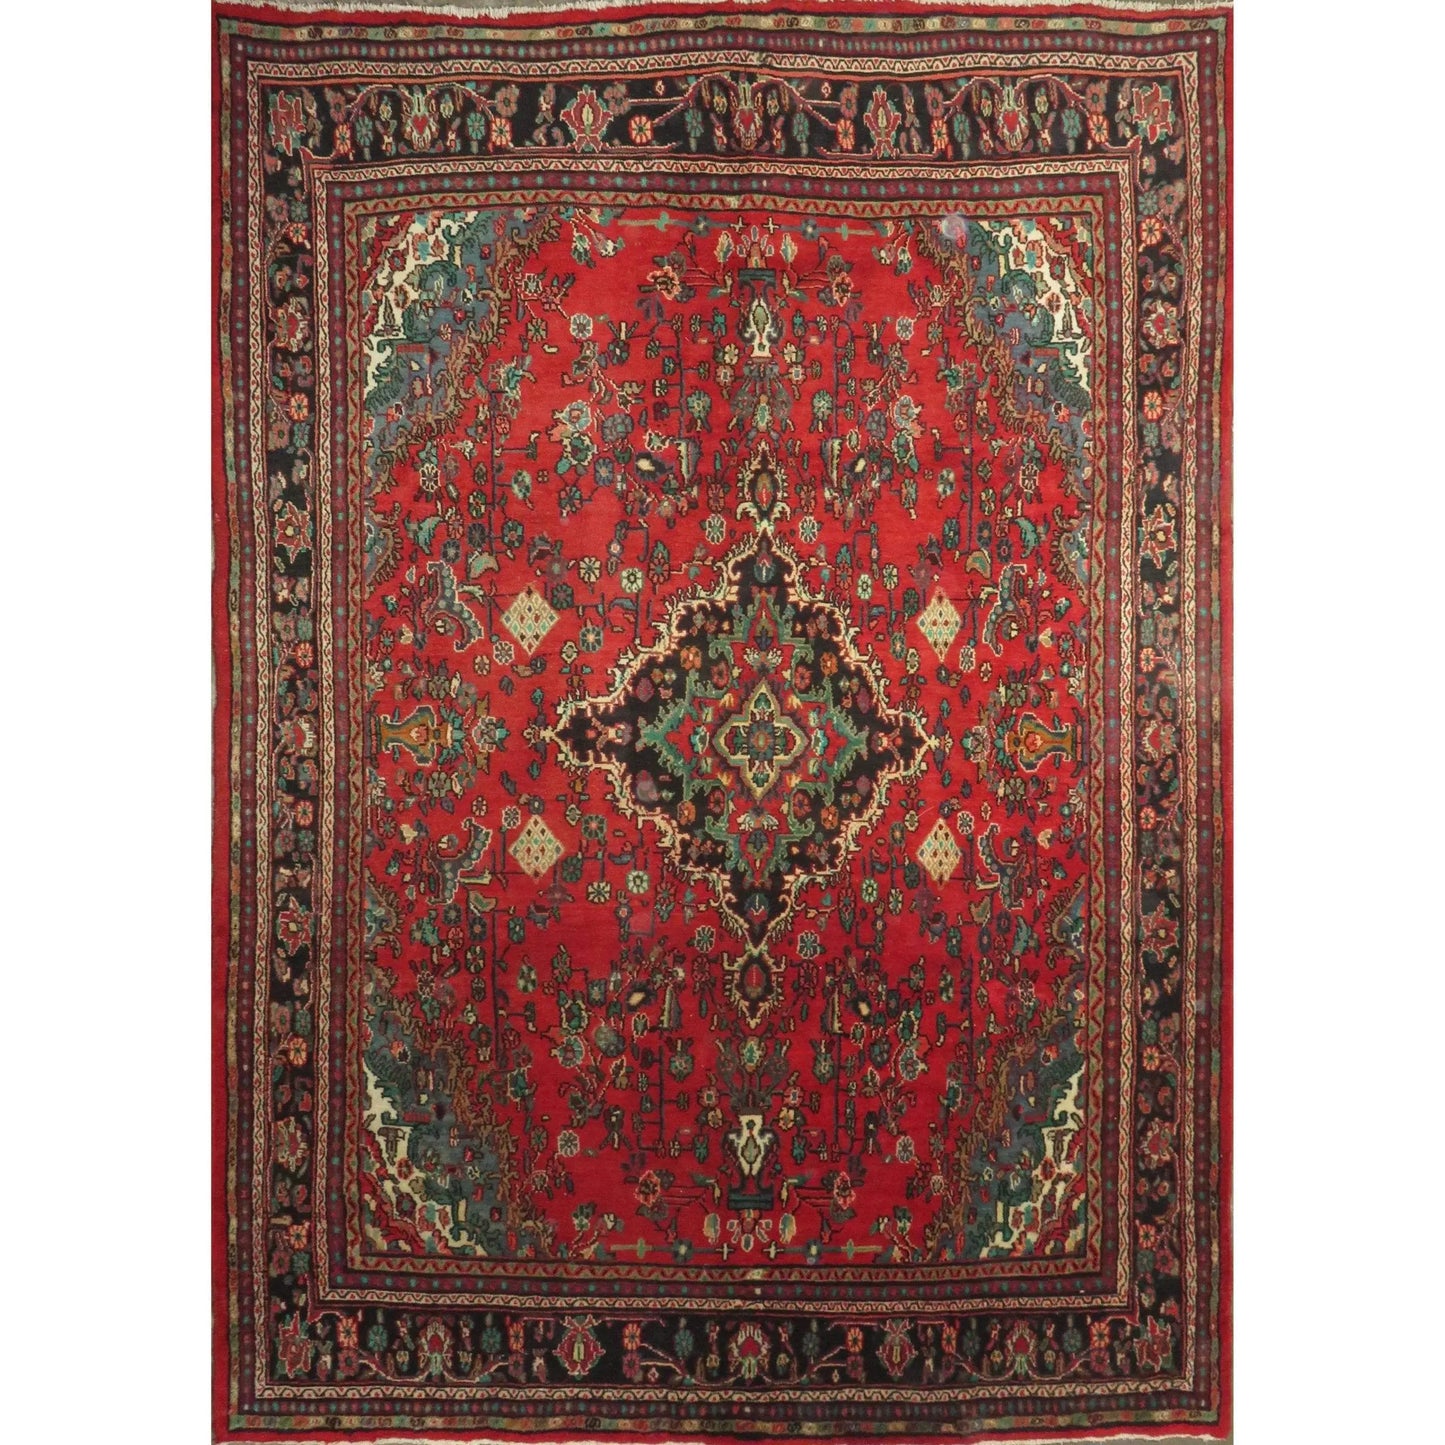 Hand-Knotted Persian Wool Rug _ Luxurious Vintage Design, 12'1" x 7'9", Artisan Crafted